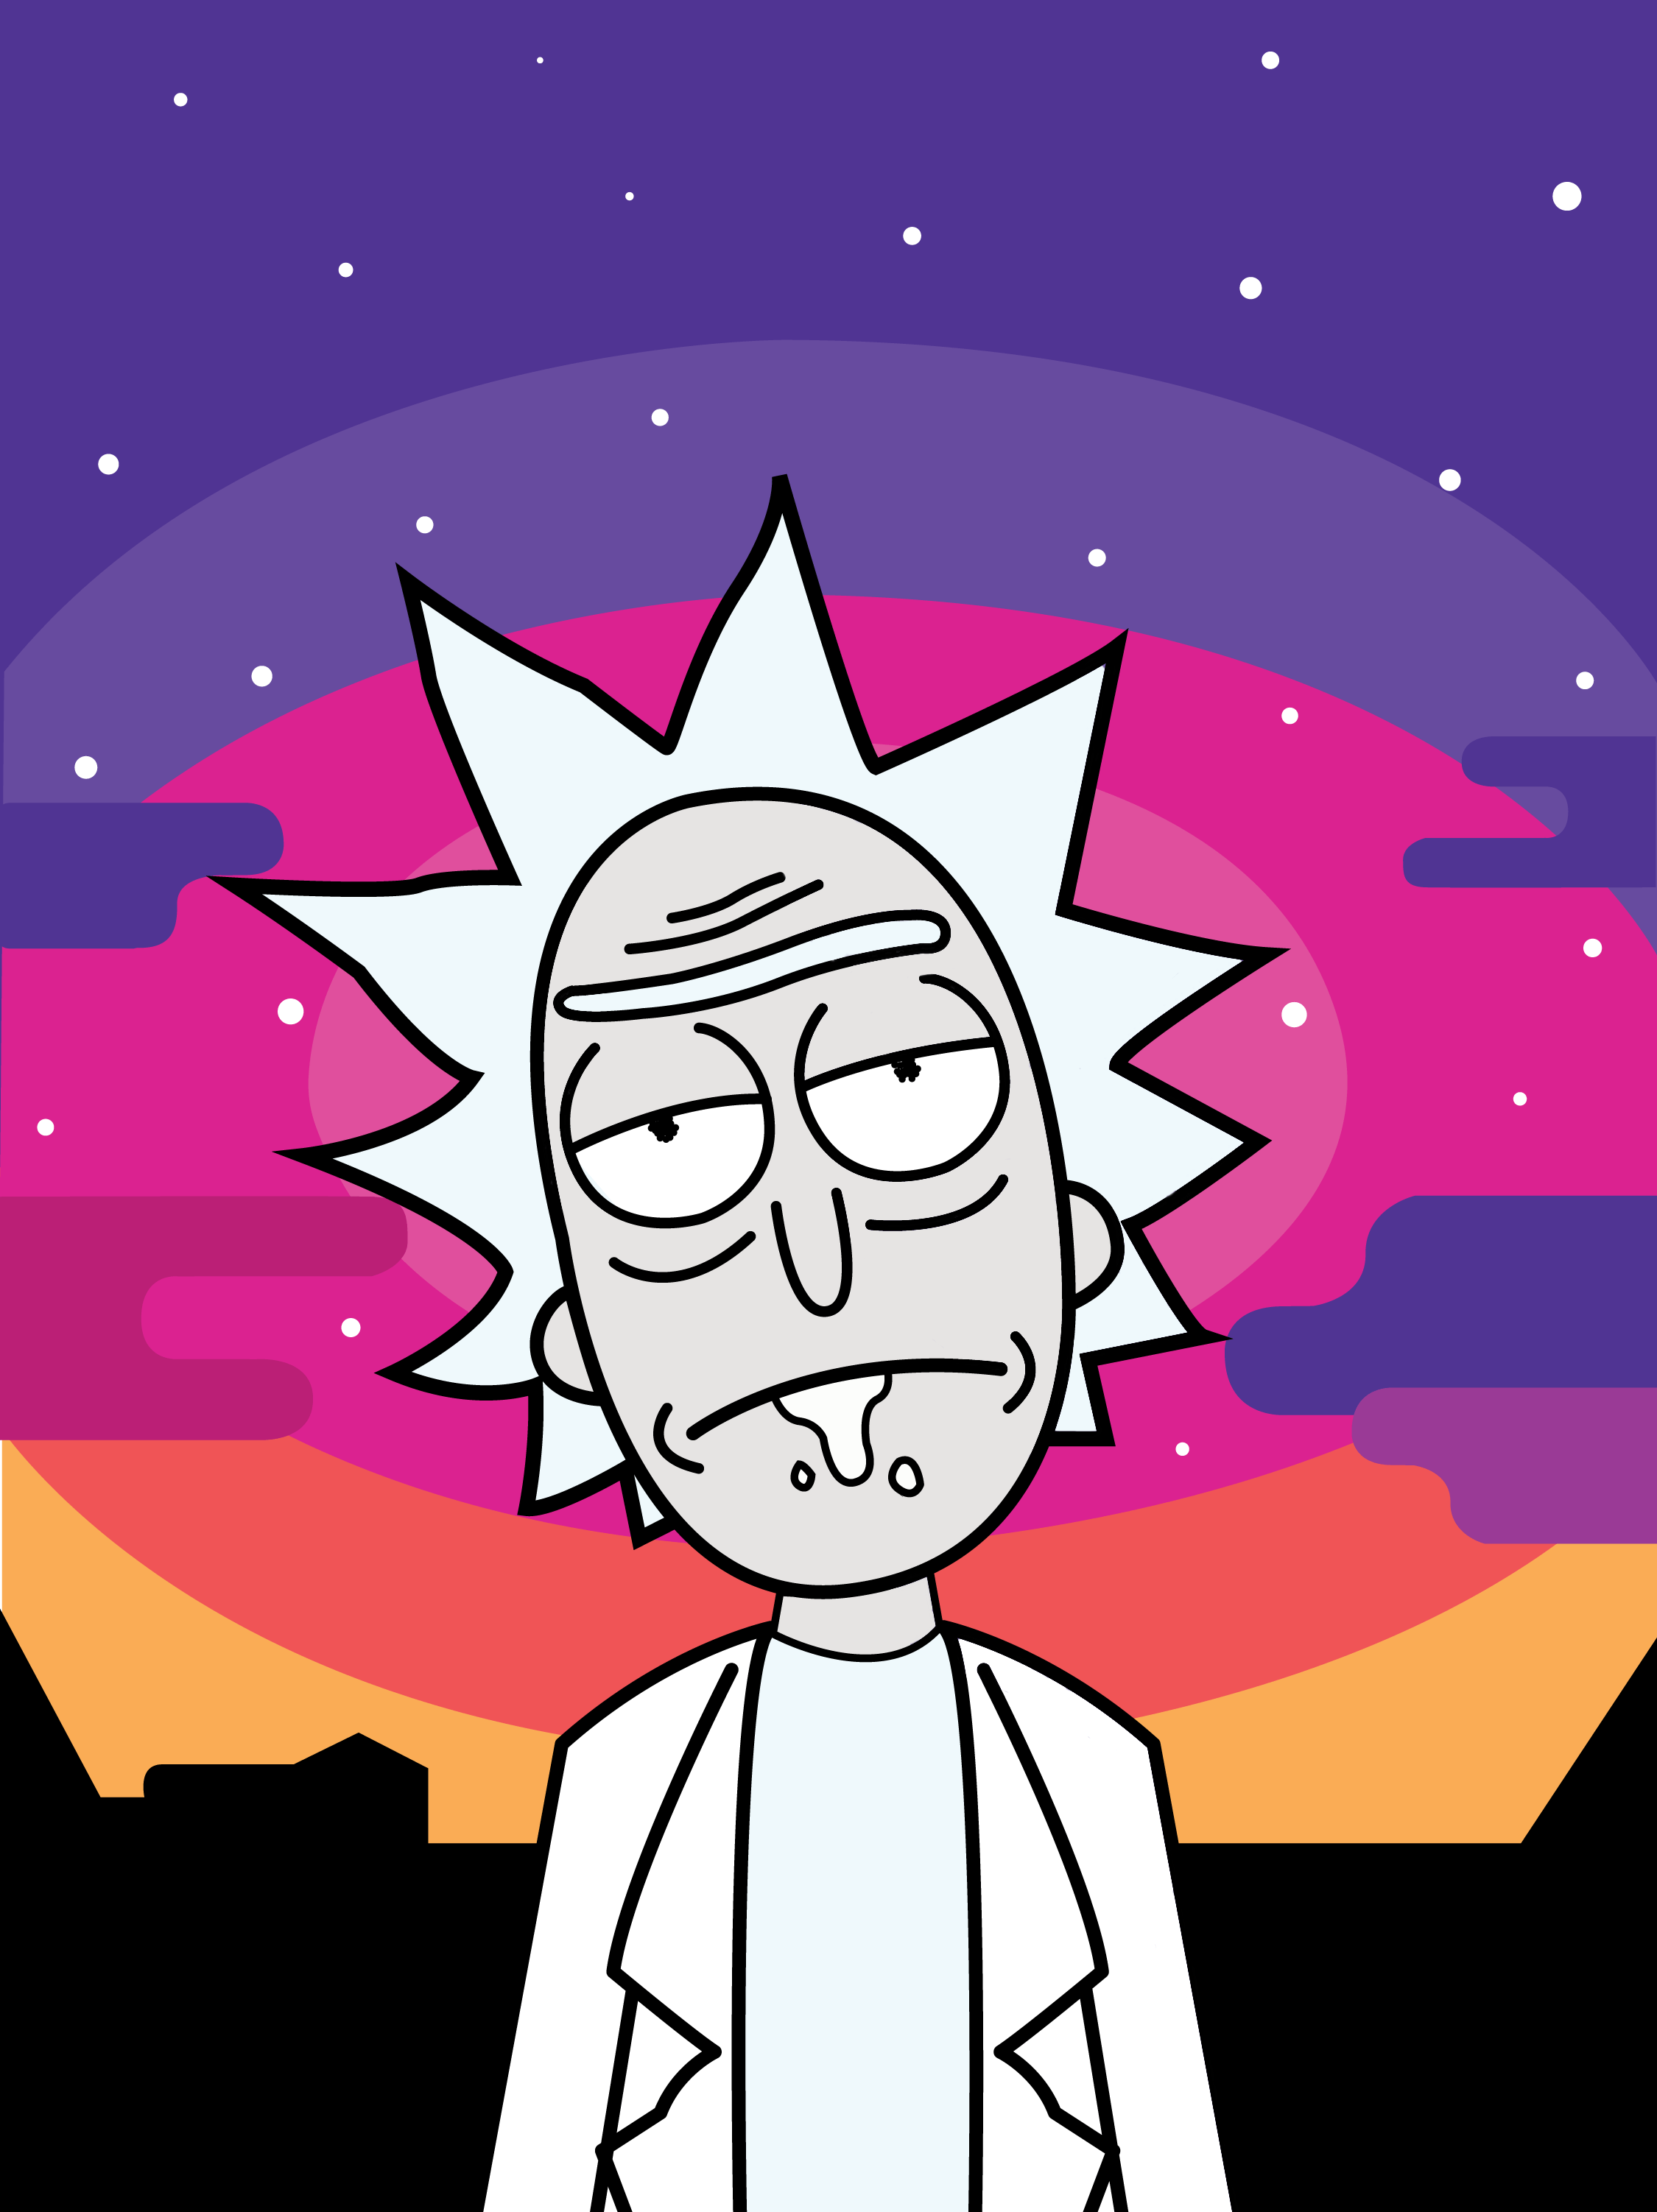 Rick and Morty Wallpaper For Phone HD - Best Phone Wallpaper HD